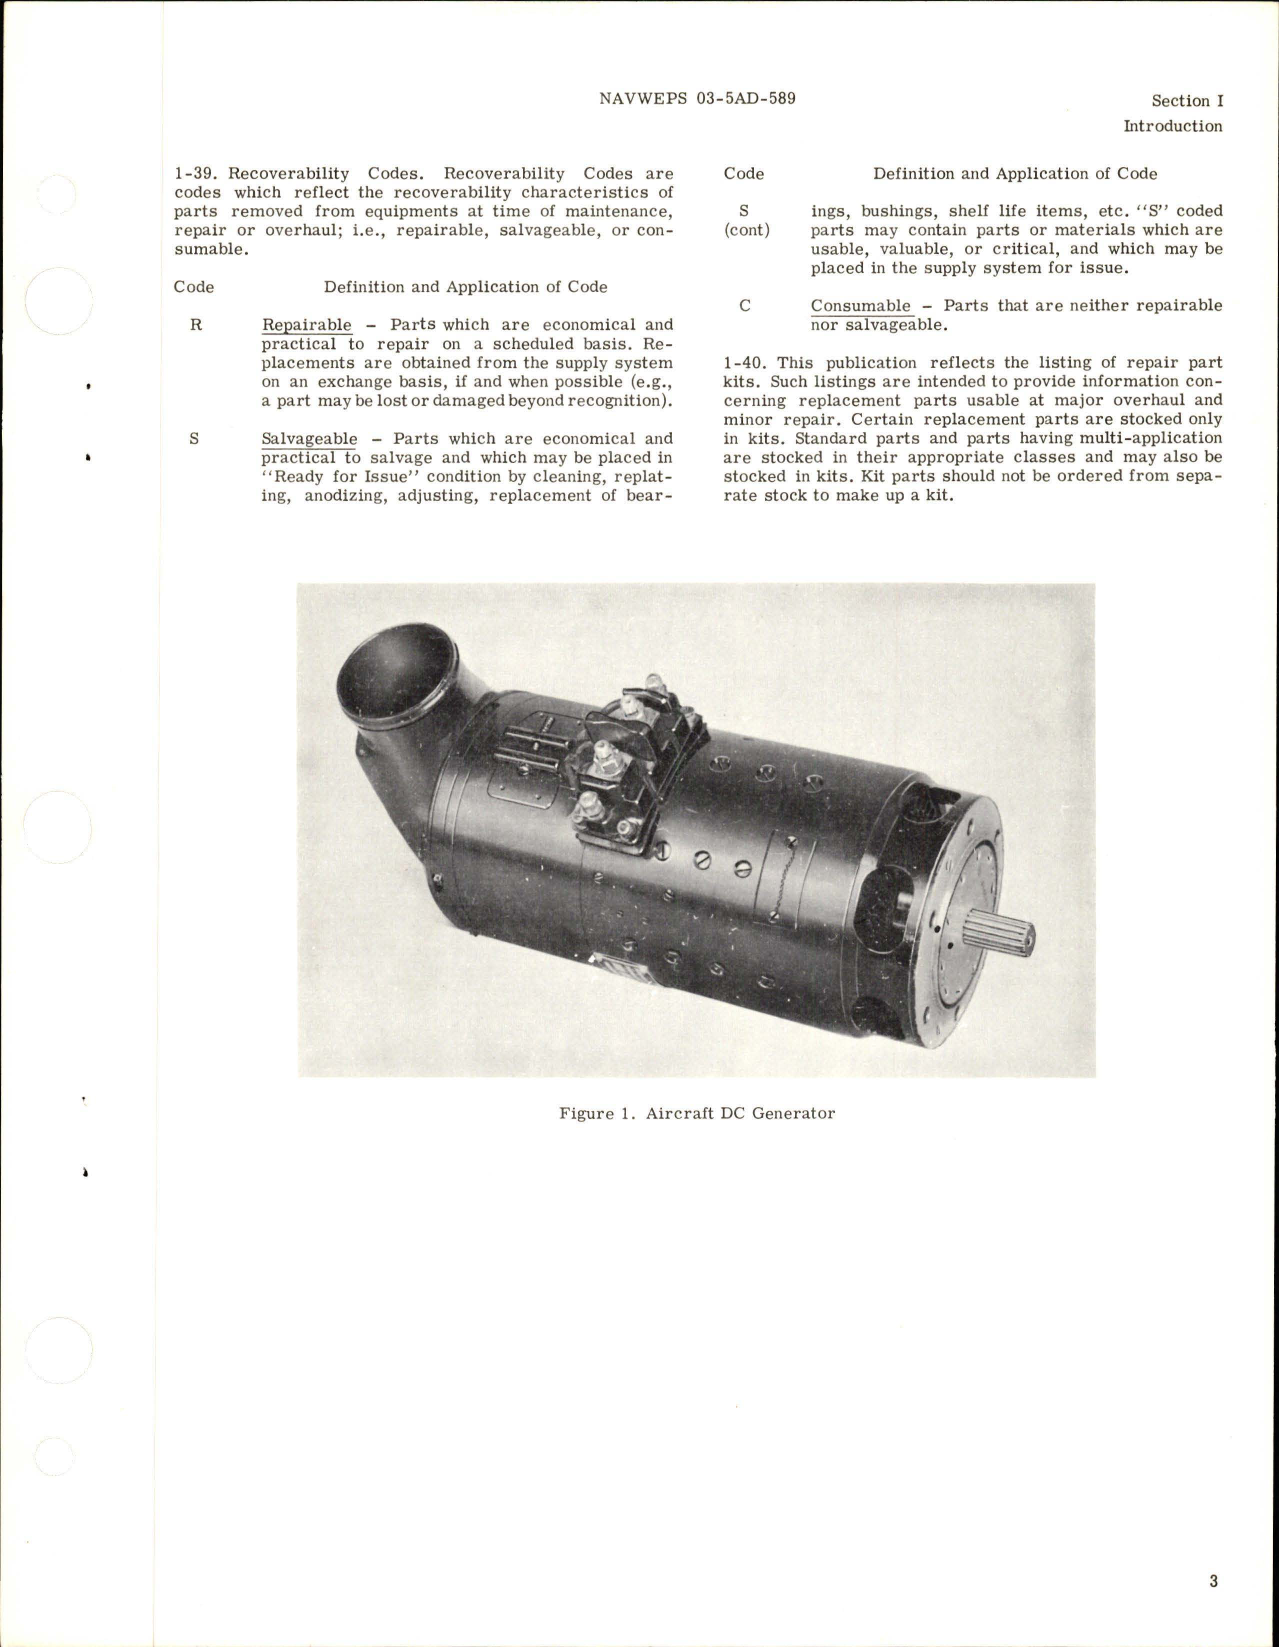 Sample page 5 from AirCorps Library document: Illustrated Parts Breakdown for DC Generators - Models 2CM76C4, 2CM76C4A, 2CM76E4, 2CM76E4C, and 2CM76E5 